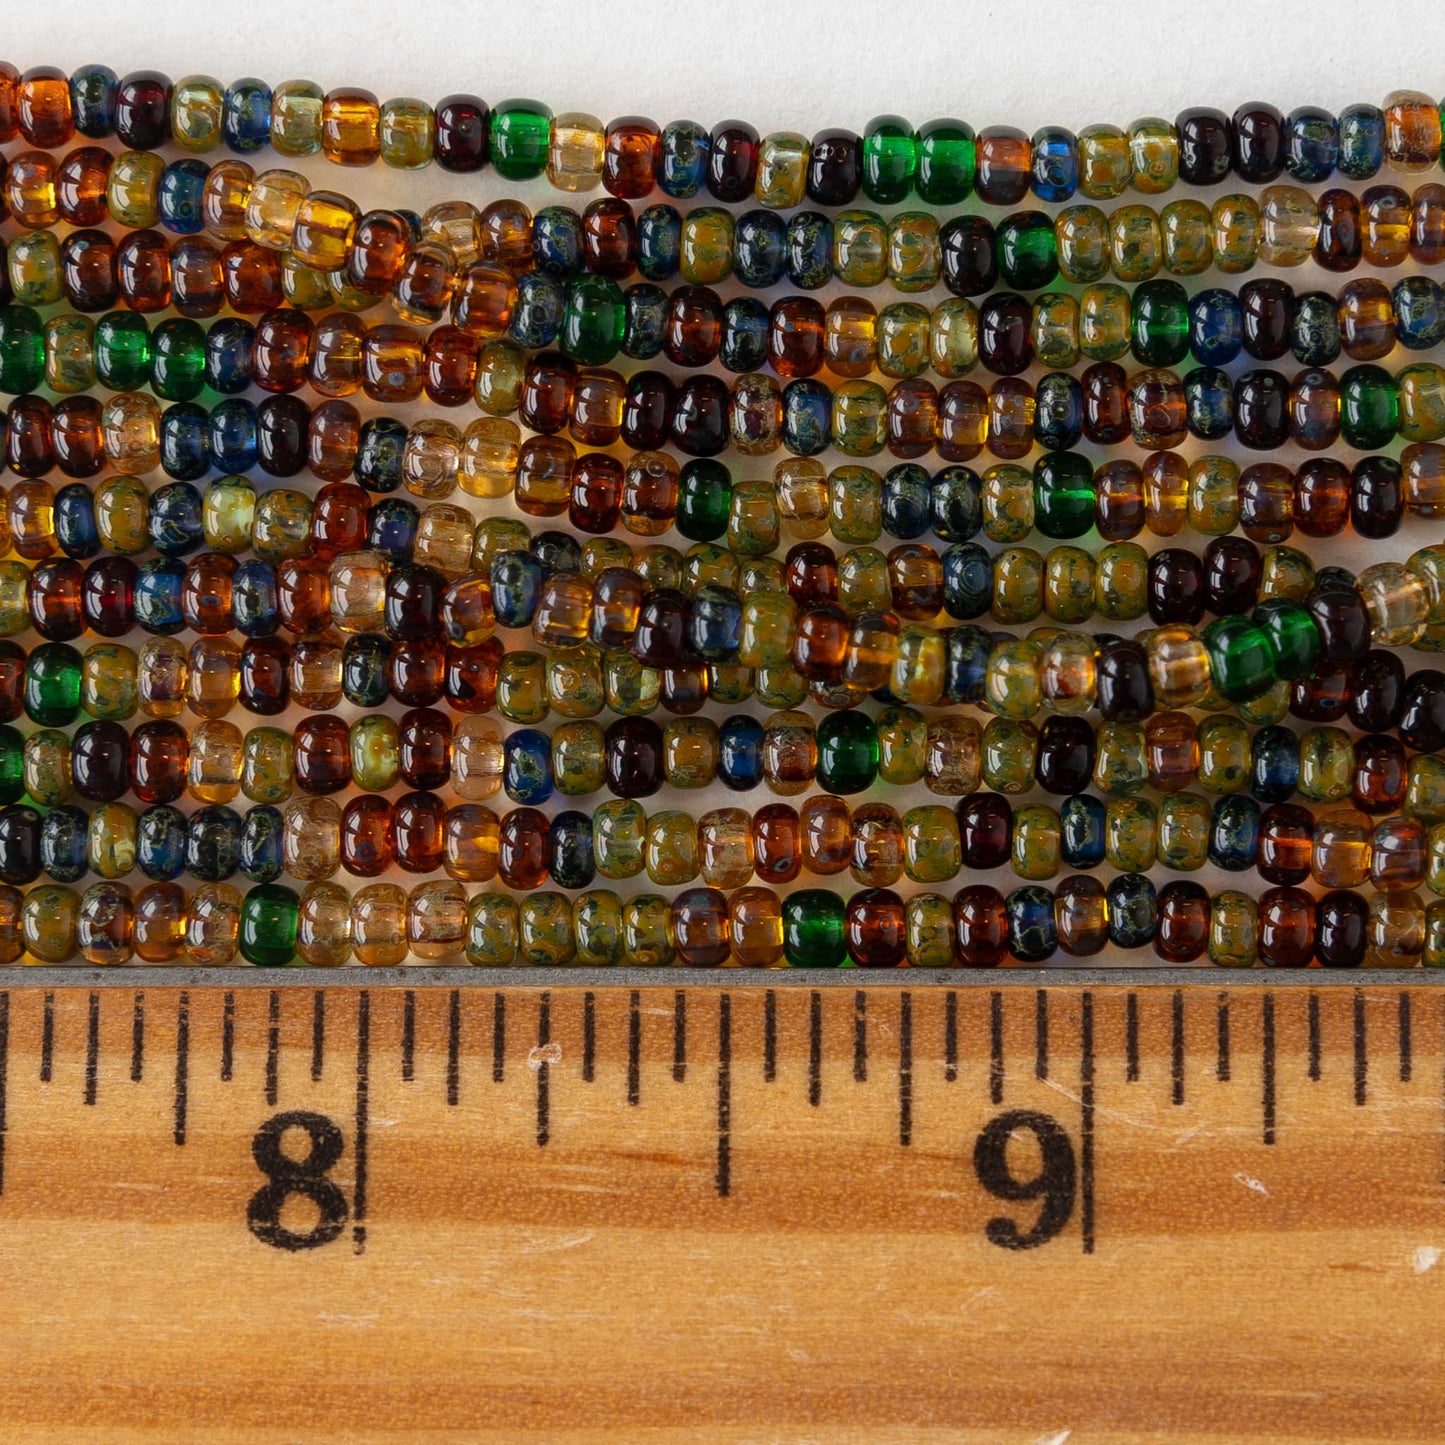 Size 8 Seed Bead Mix - Transparent Jewel Tones - 60 inches